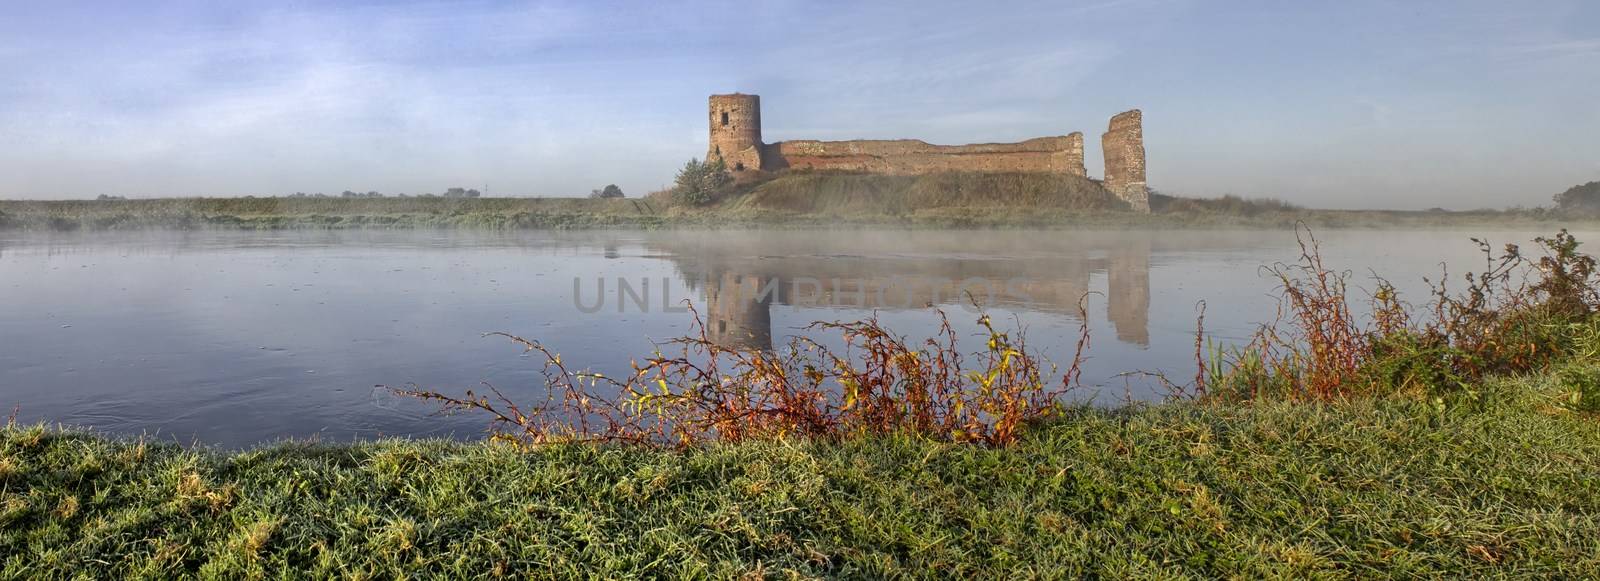 The fortified medieval castle with tower in Kolo city by sanzios